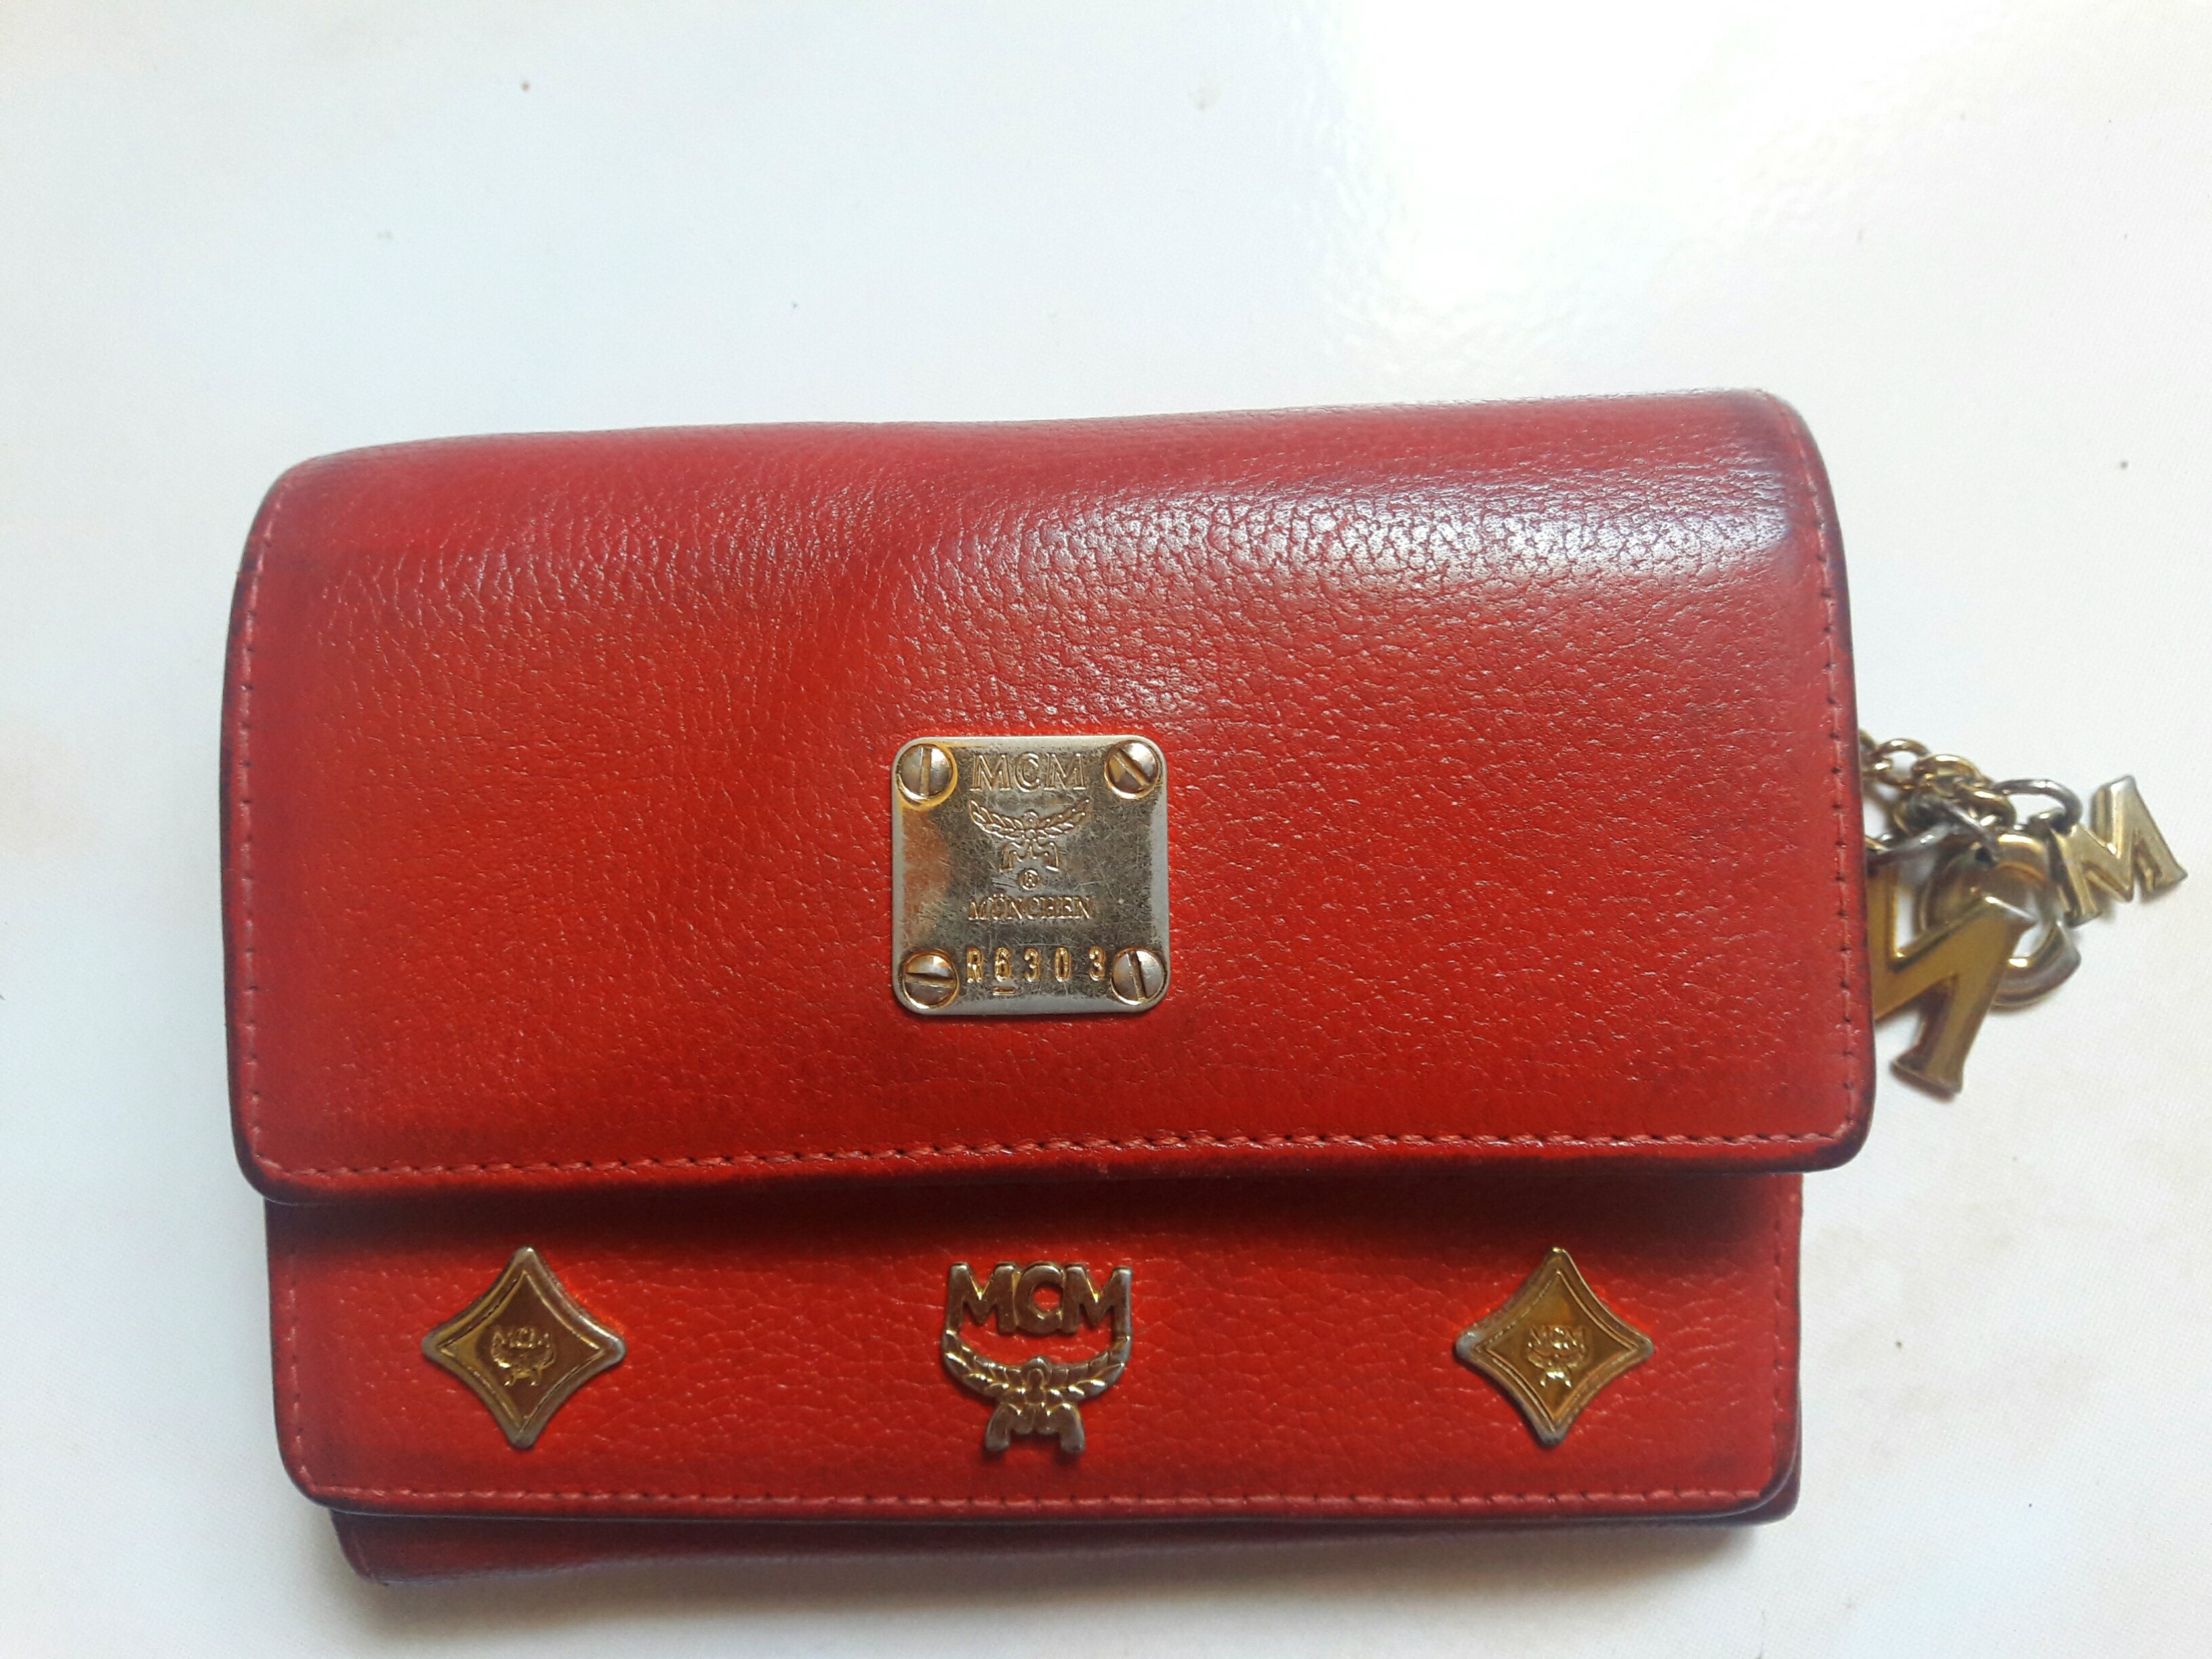 MCM wallet, Women's Fashion, Bags & Wallets, Purses & Pouches on Carousell